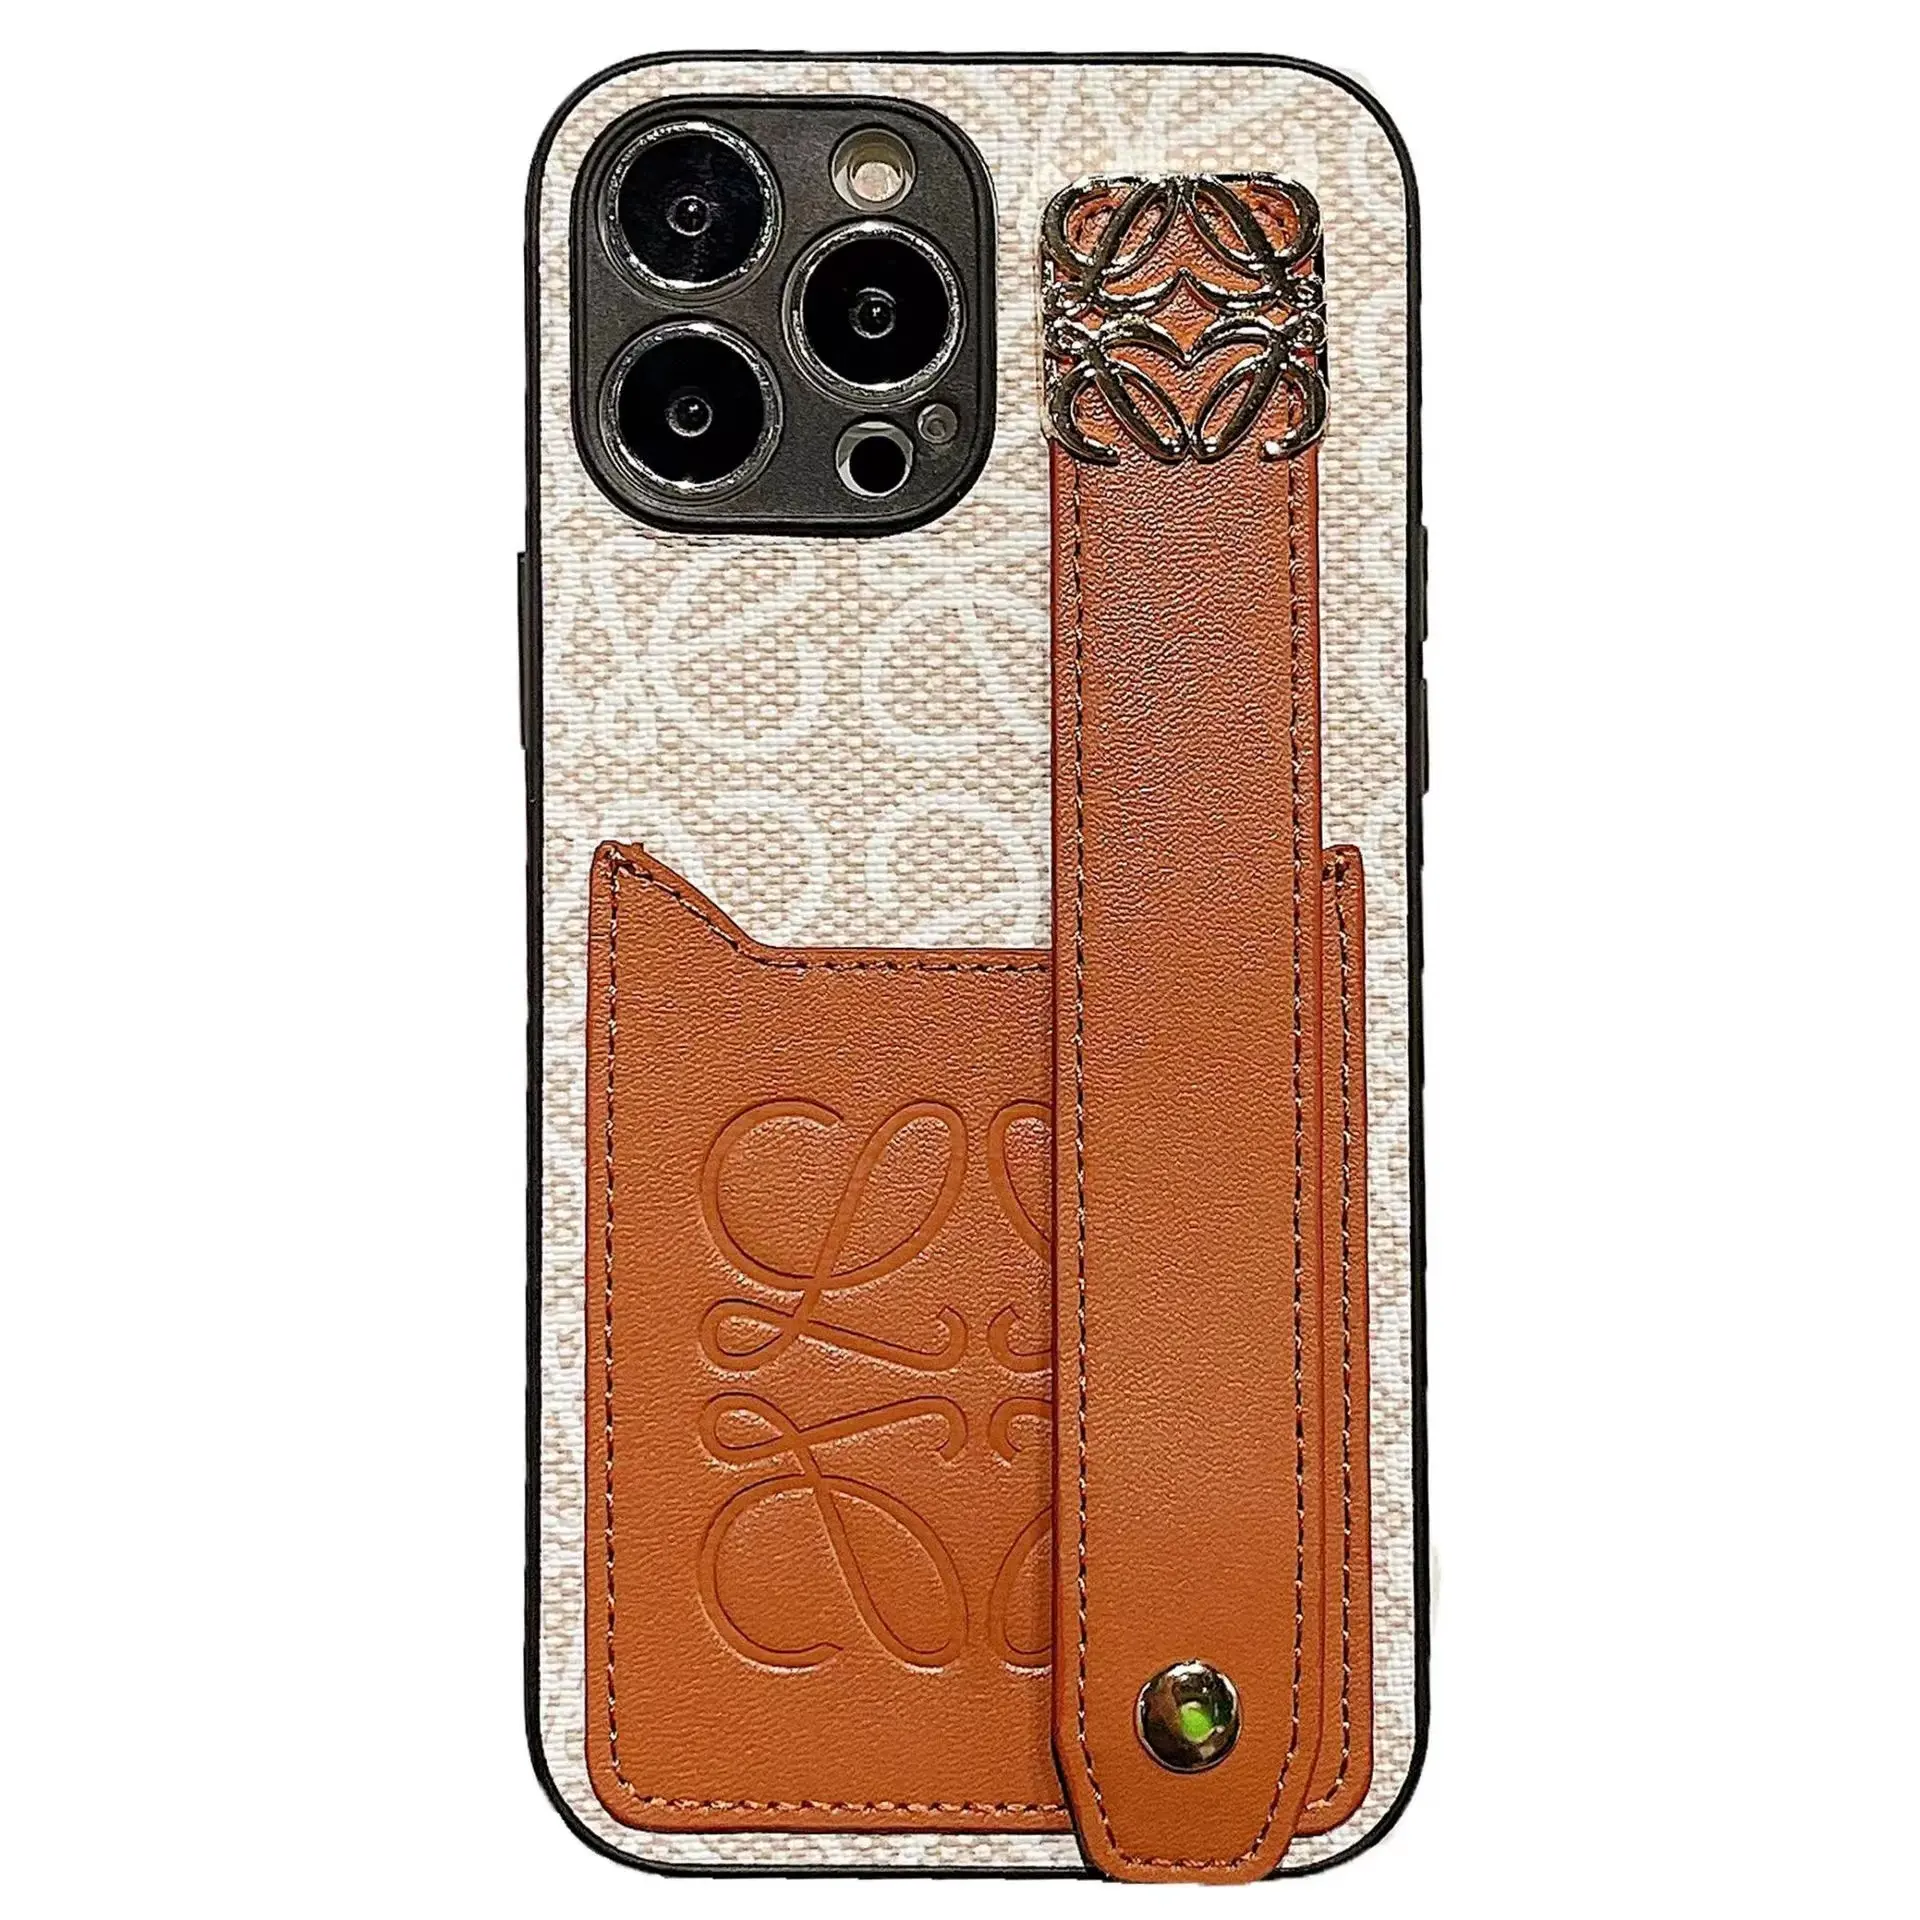 custom leather phone case and cards holder leather phone cases genuine leather phone cover with Wrist band